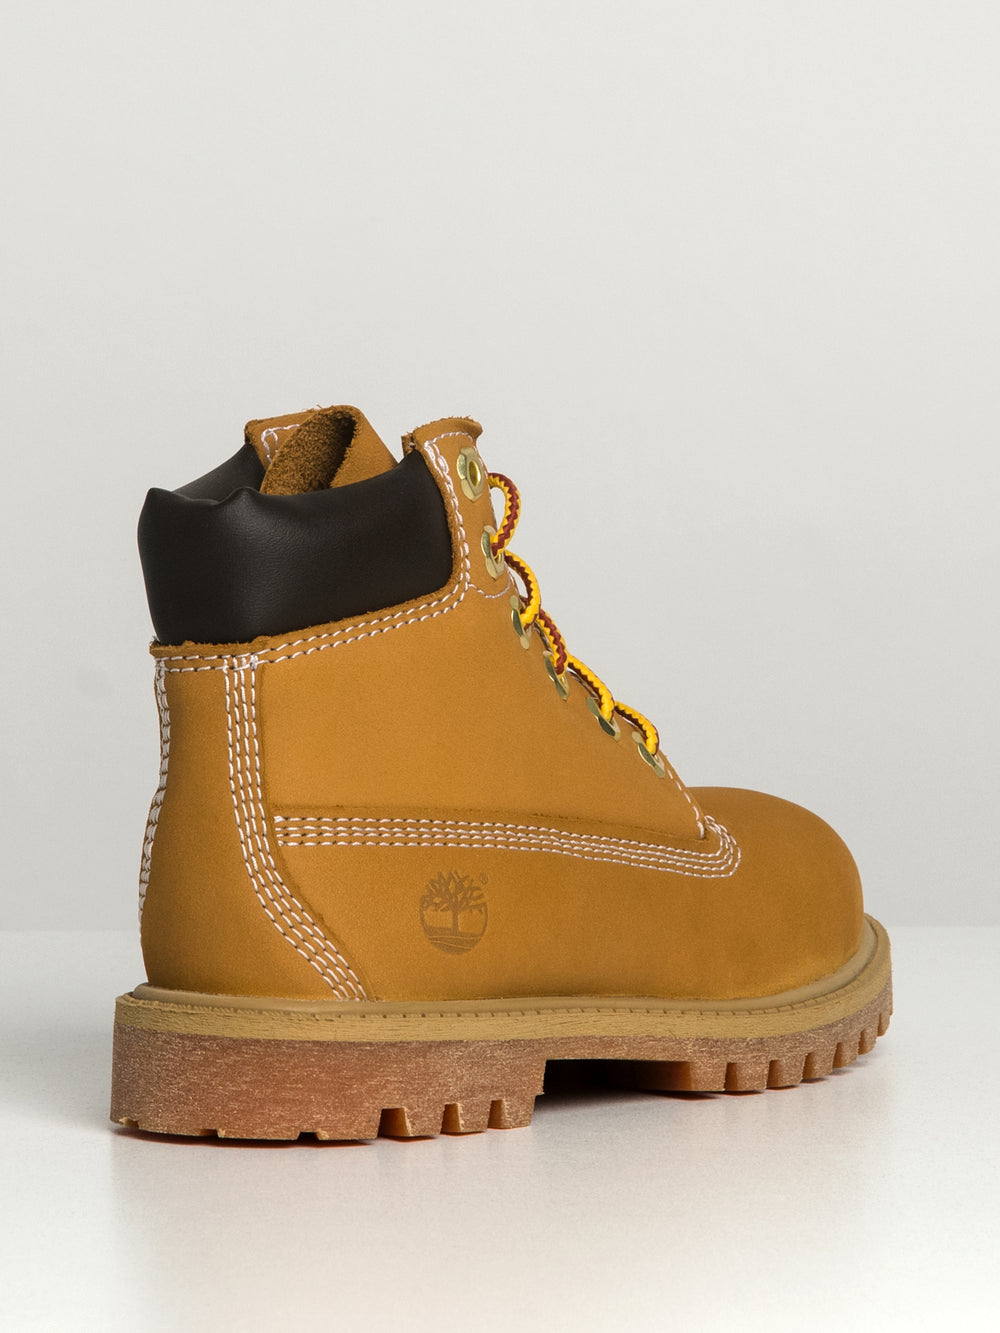 KIDS TIMBERLAND TODDLER 6" PREM WP BOOT - WHEAT NBCK - CLEARANCE